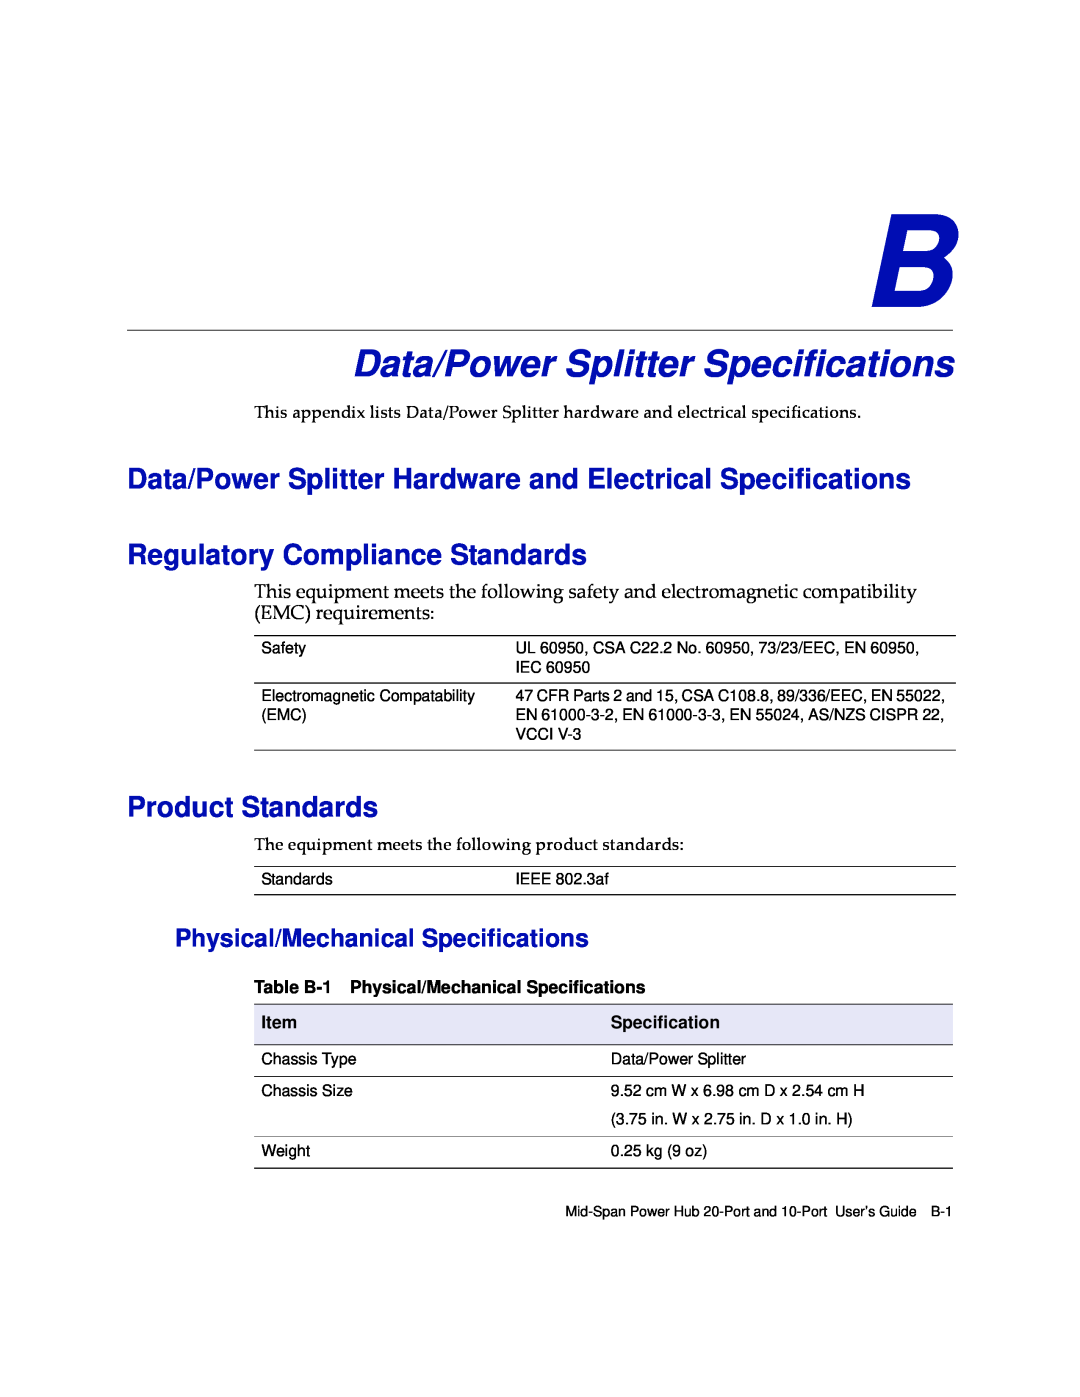 Enterasys Networks BL-89620ENT Data/Power Splitter Specifications, Physical/Mechanical Specifications, Product Standards 